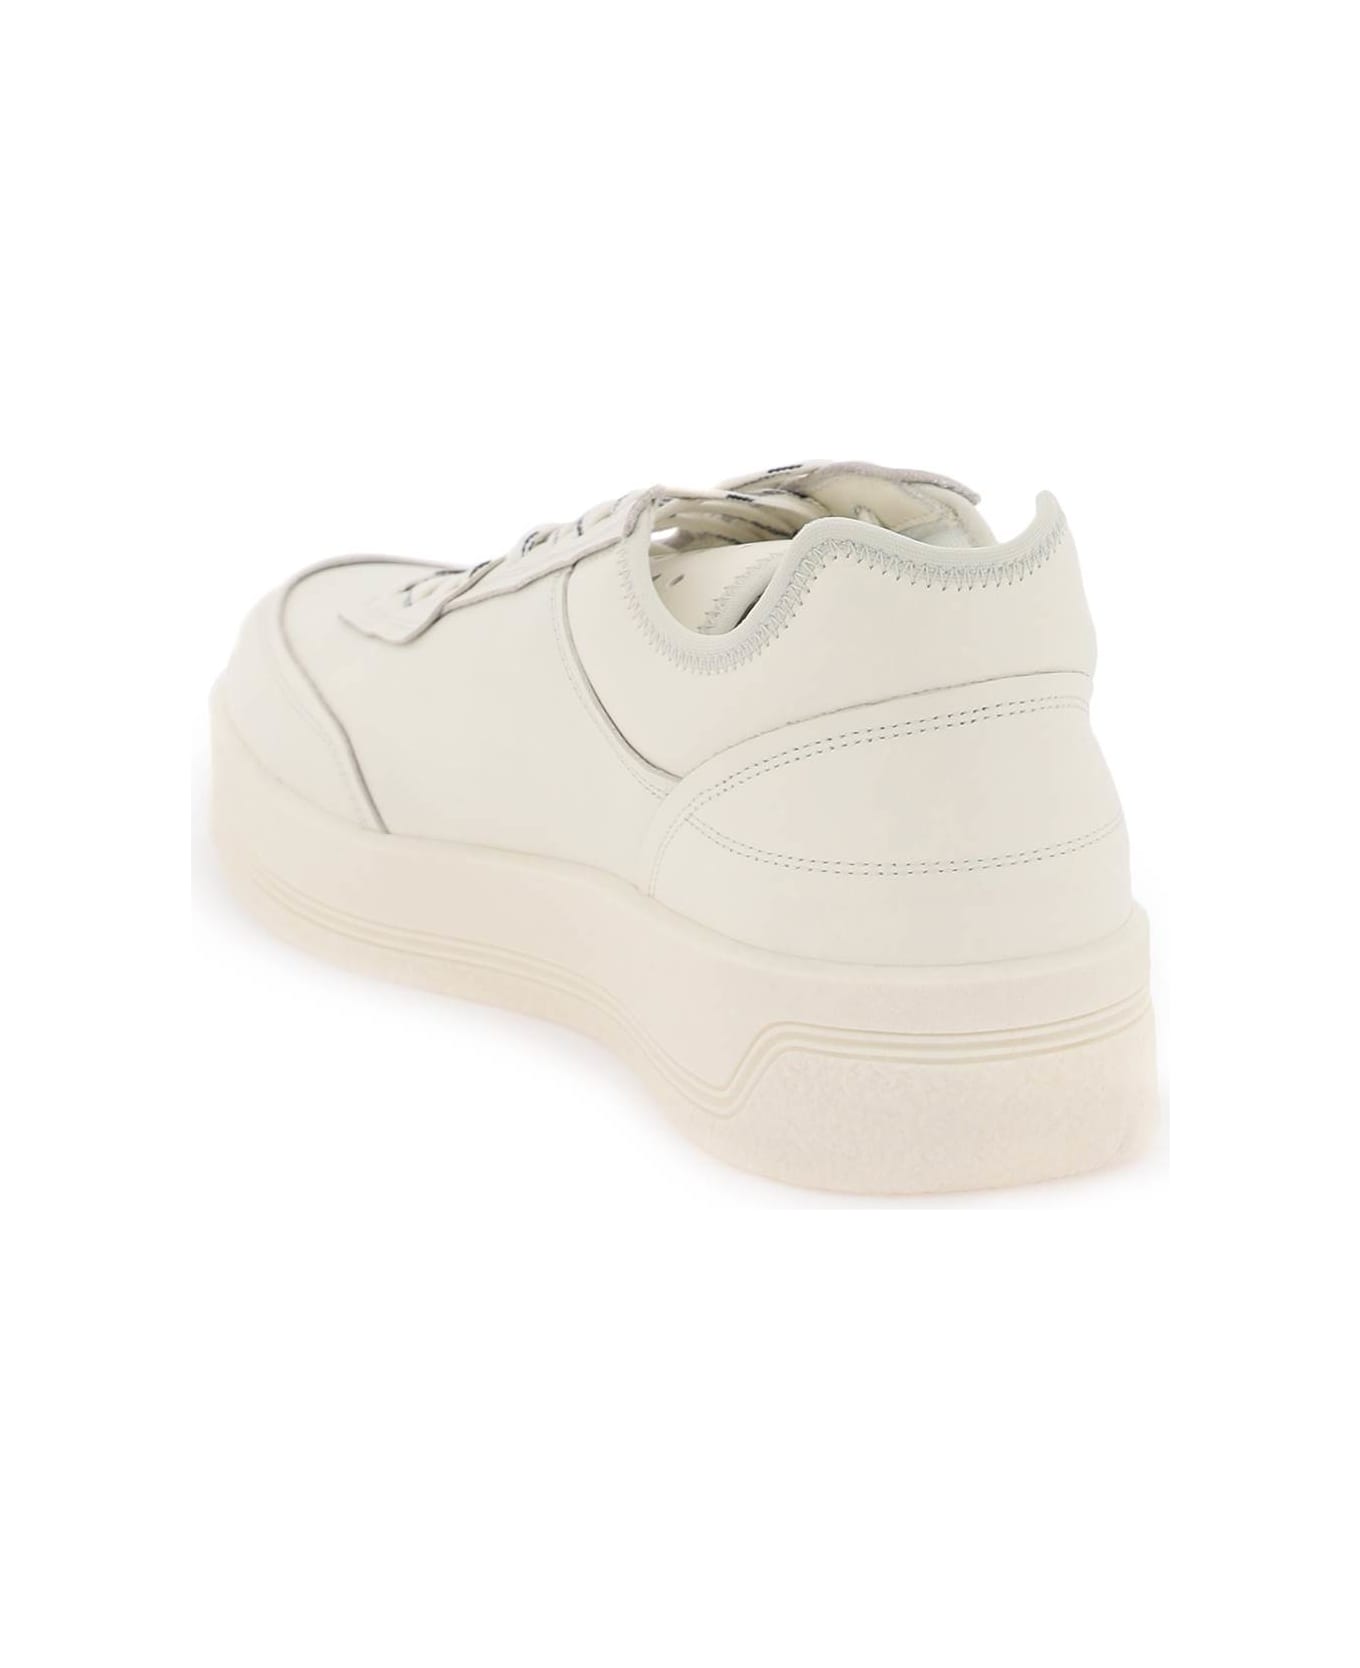 OAMC 'cosmos Cupsole' Sneakers - OFF WHITE (White)